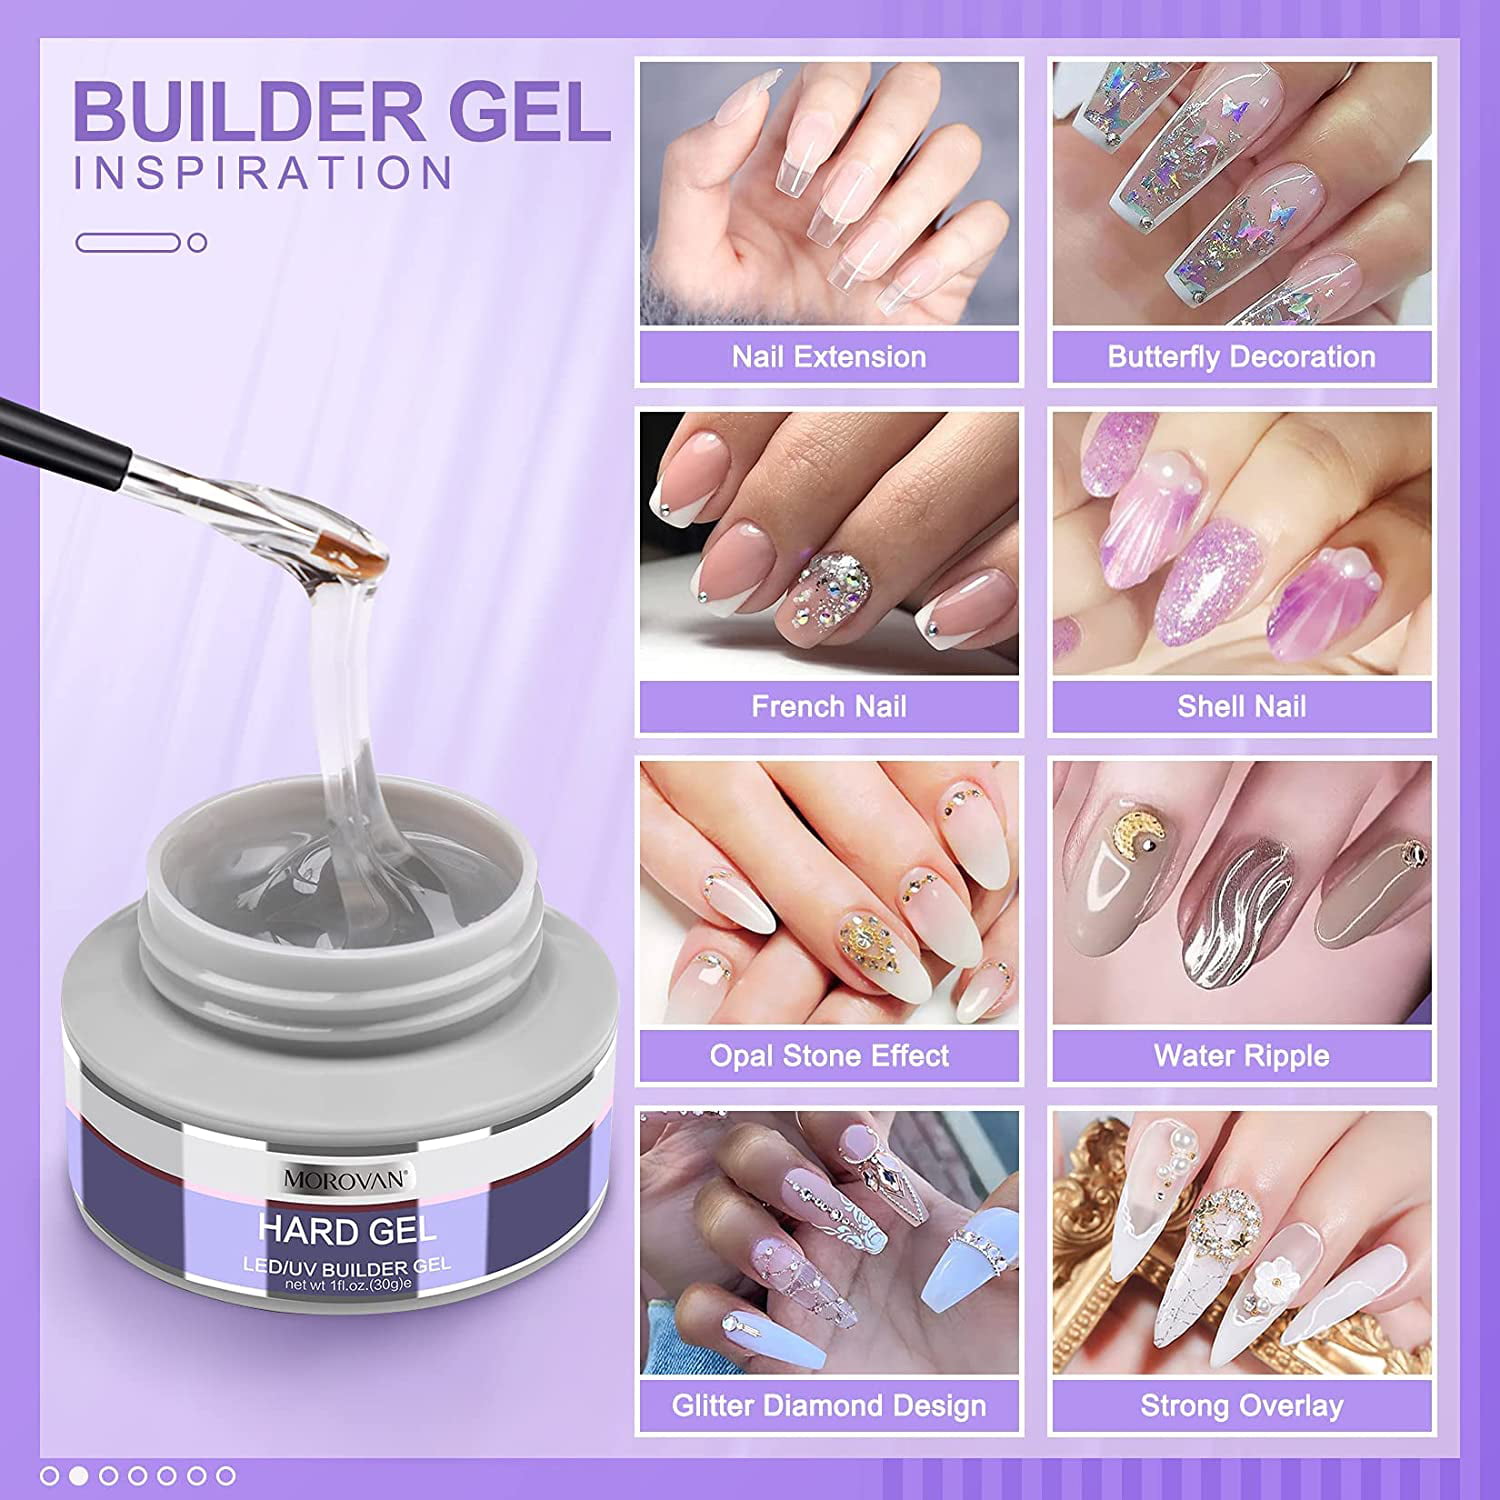 Professional UV Gel Nail Builder Kit - The Manicure Company Systems